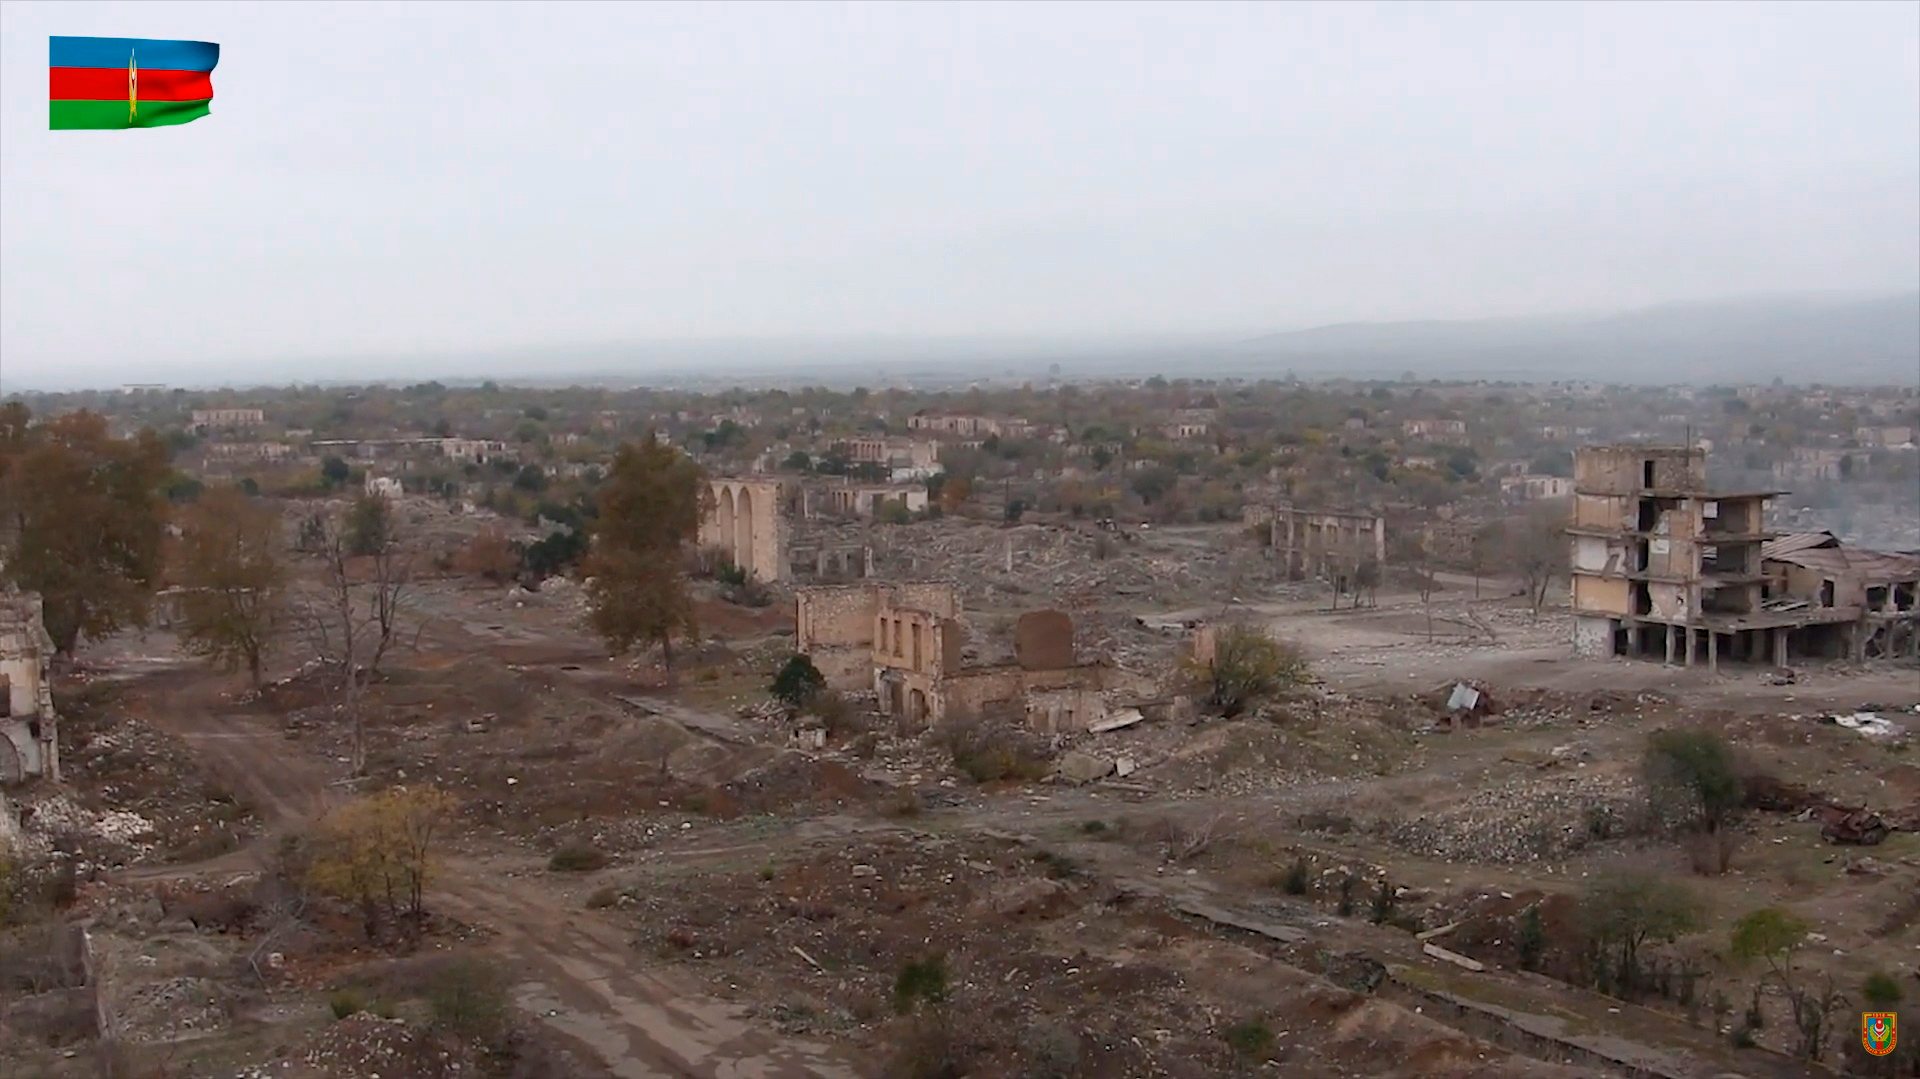 epa08831723 A handout still image taken from a video footage released 20 November 2020 by the press service of the Azerbaijan&#039;s Defence Ministry shows a general view of a ruined city of Aghdam in the Aghdam region, Azerbaijan, 20 November 2020. In accordance with the trilateral statement signed by the Azerbaijan&#039;s and Russian Presidents and  Armenian Prime Minister, the Azerbaijani army units entered the Aghdam region on 20 November 2020 and took it under the Azerbaijani control.  EPA/AZERBAIJAN DEFENCE MINISTRY / HANDOUT MANDATORY CREDIT/BEST QUALITY AVAILABLE/ HANDOUT EDITORIAL USE ONLY/NO SALES